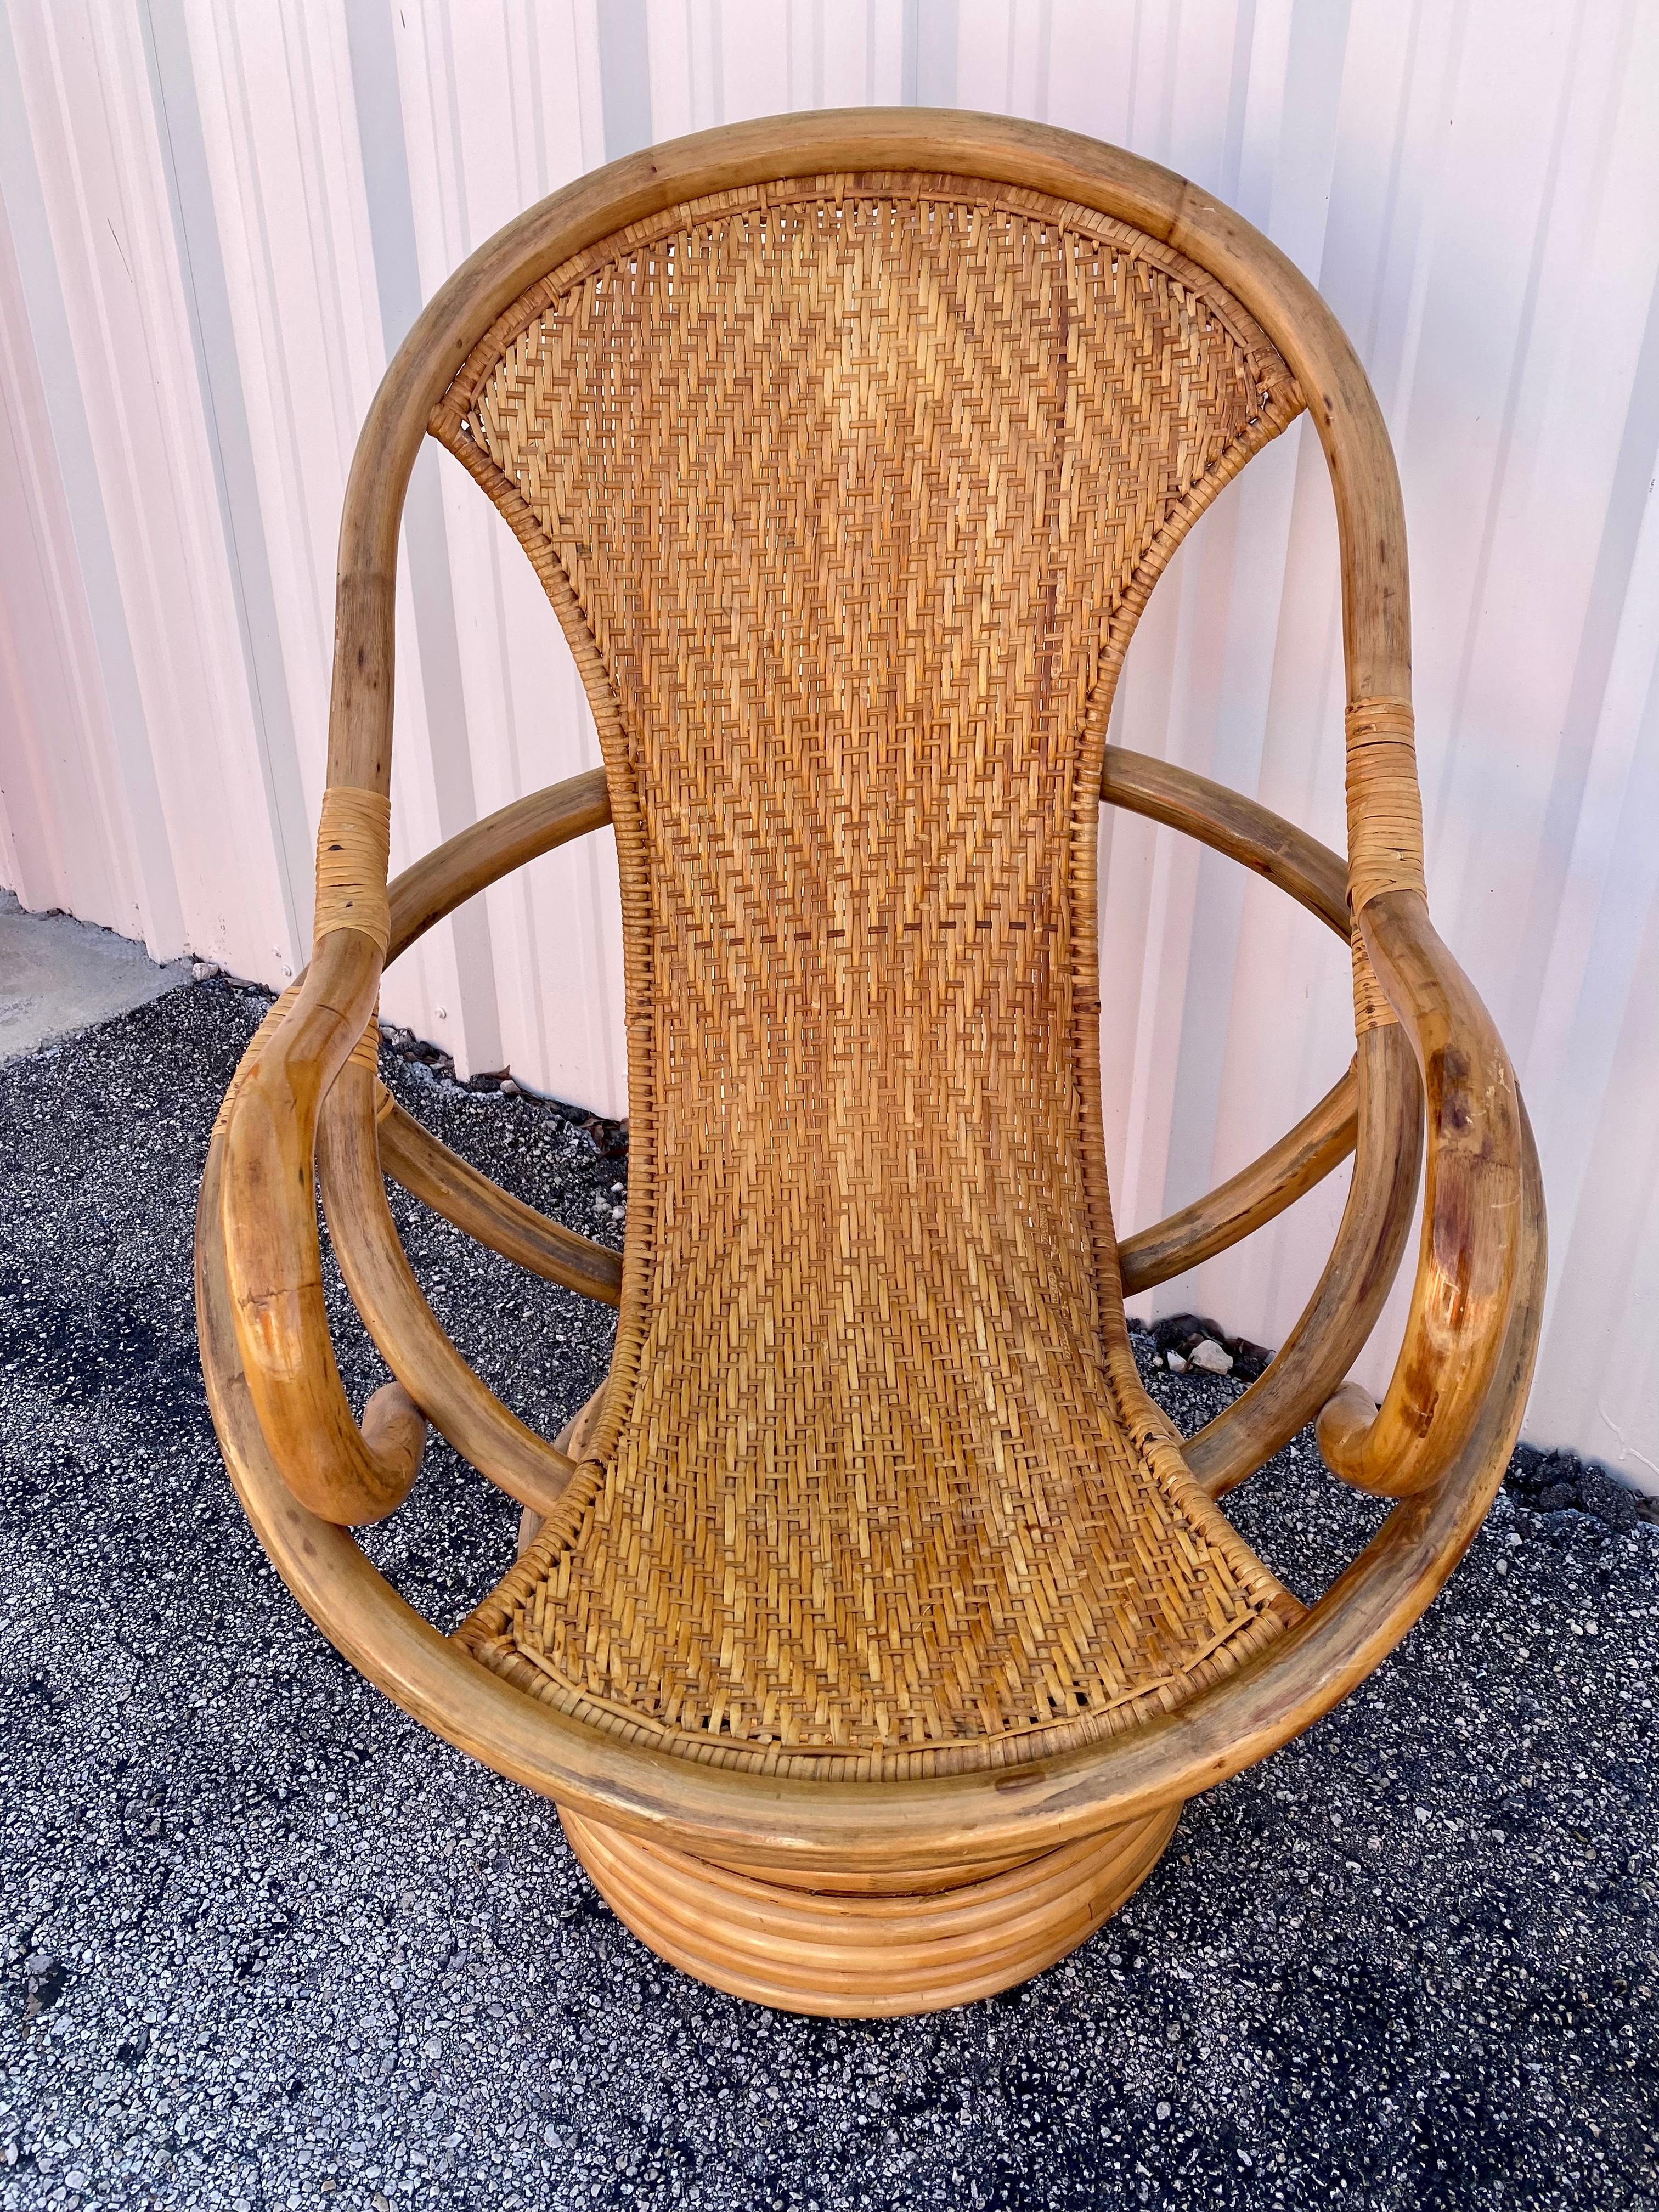 1980s Rattan Coastal Sculptural Swivel Chairs, set of 2 For Sale 5